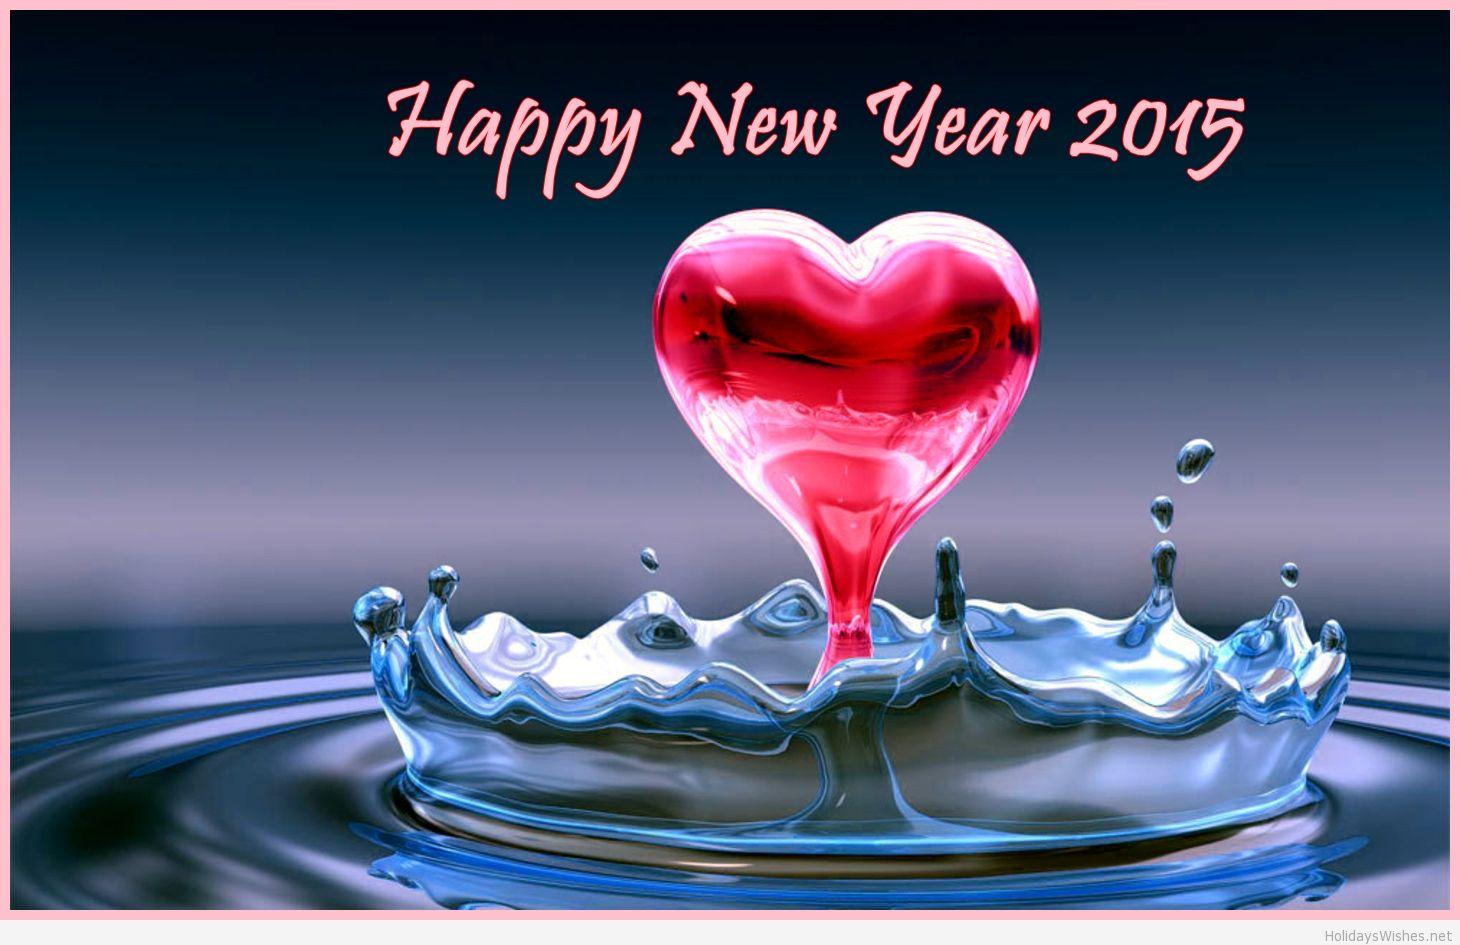 Awesome 3D Love Wallpaper New Year 2015. HD Wallpaper Range